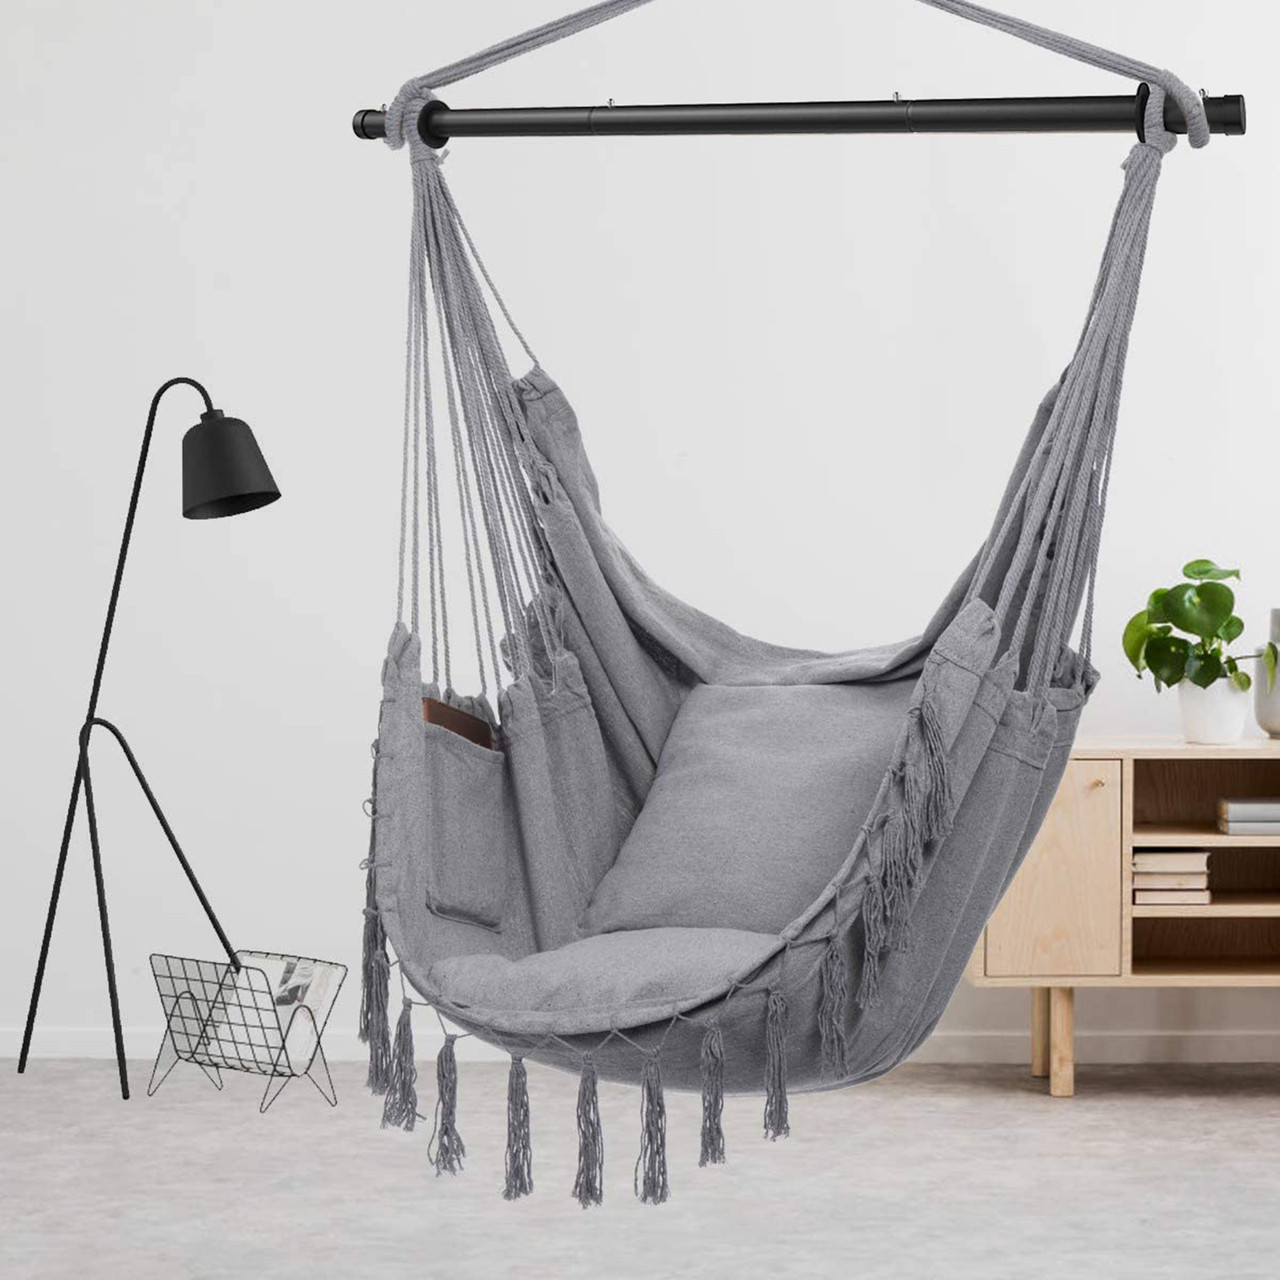 Indoor/Outdoor Hammock Chair Hanging Rope Swing With Cushions 150KG Load Bearing Gray